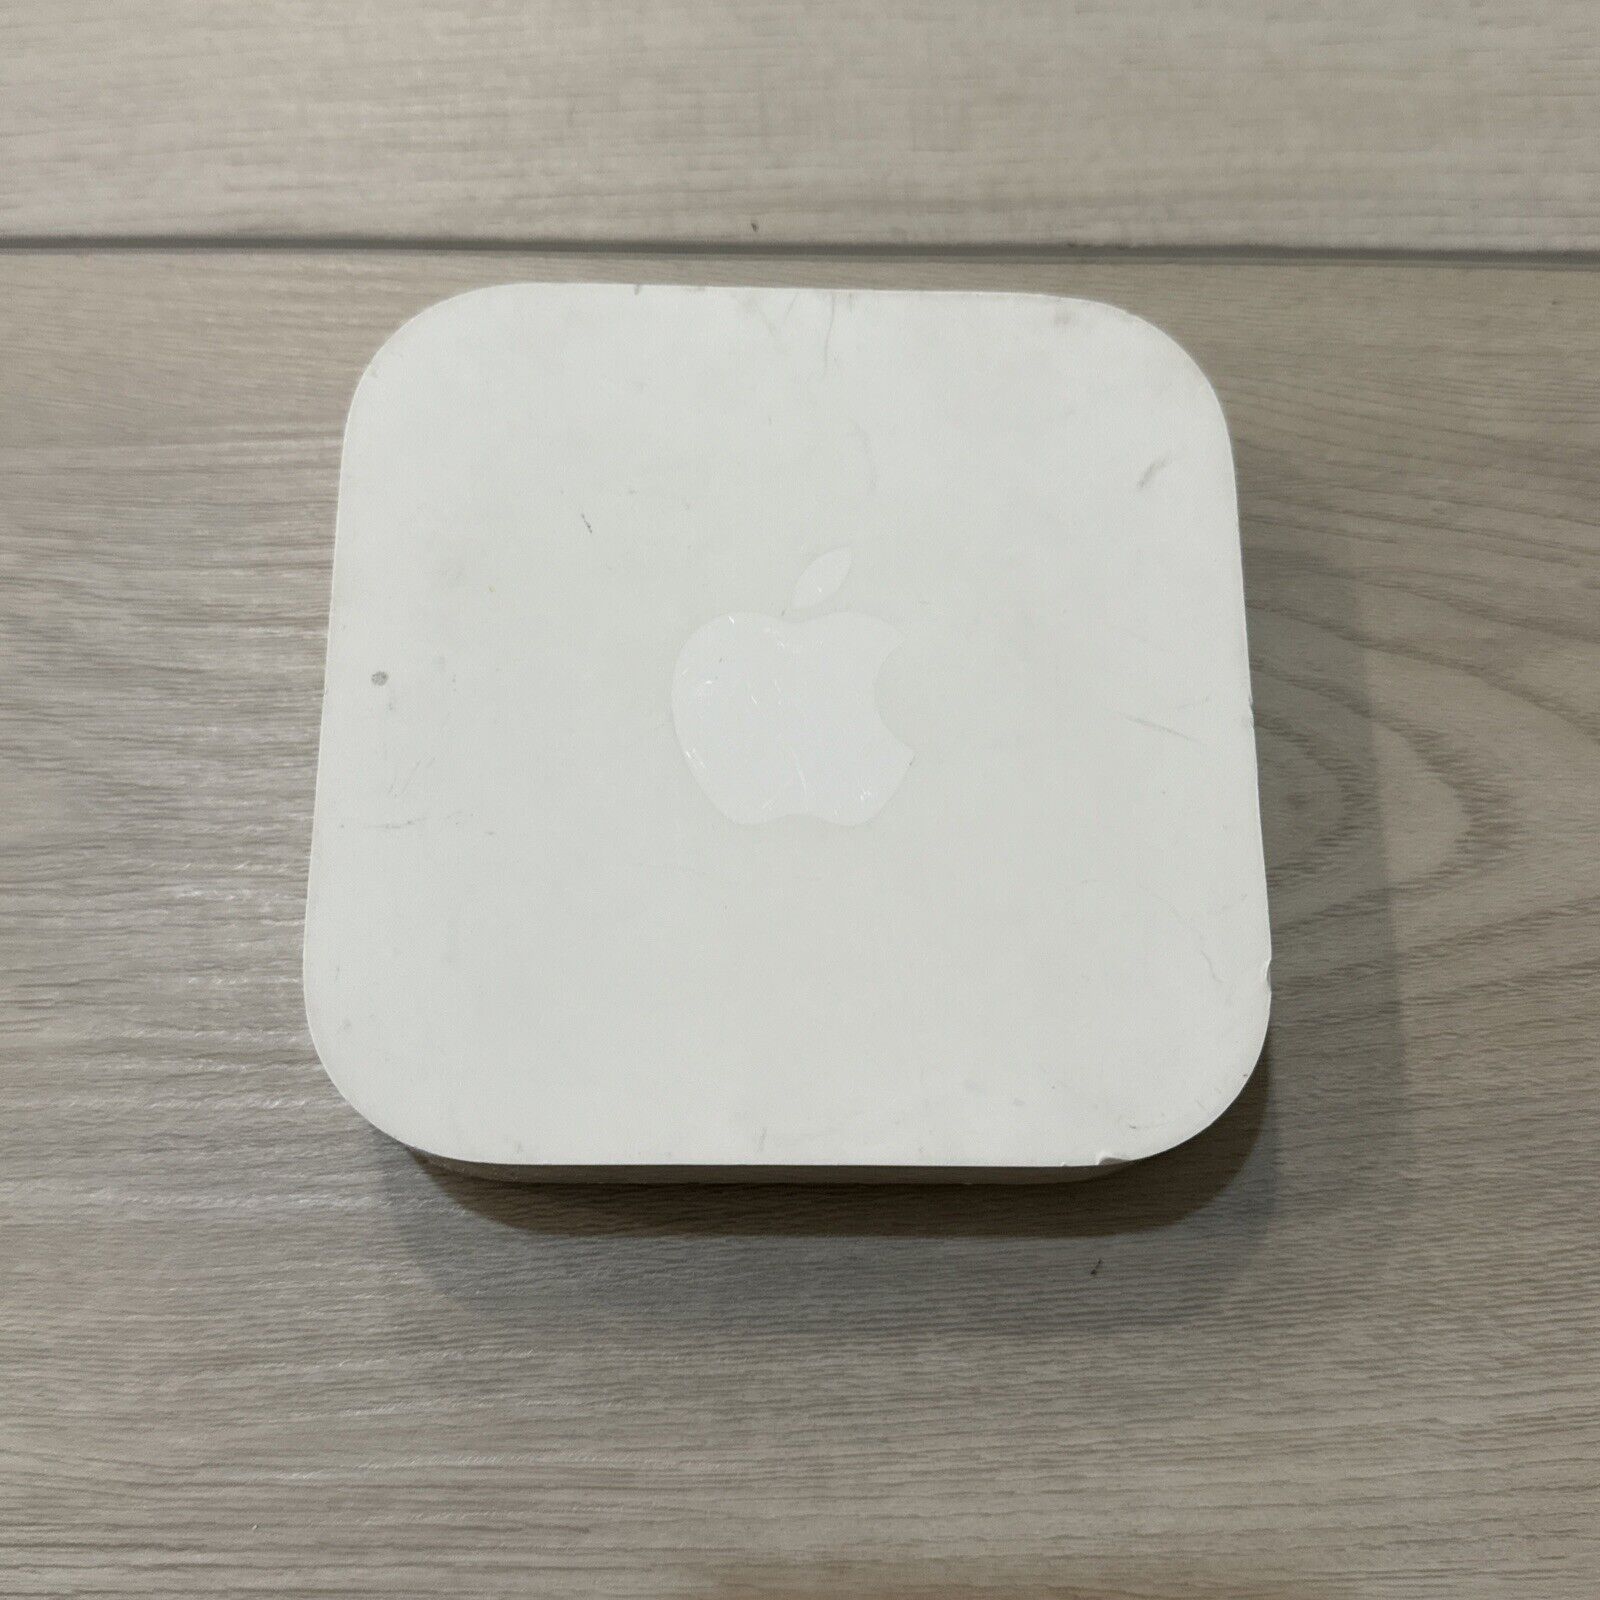 Apple A1392 Airport Express 2nd Generation Dualband 802.11n WiFi Router ONLY